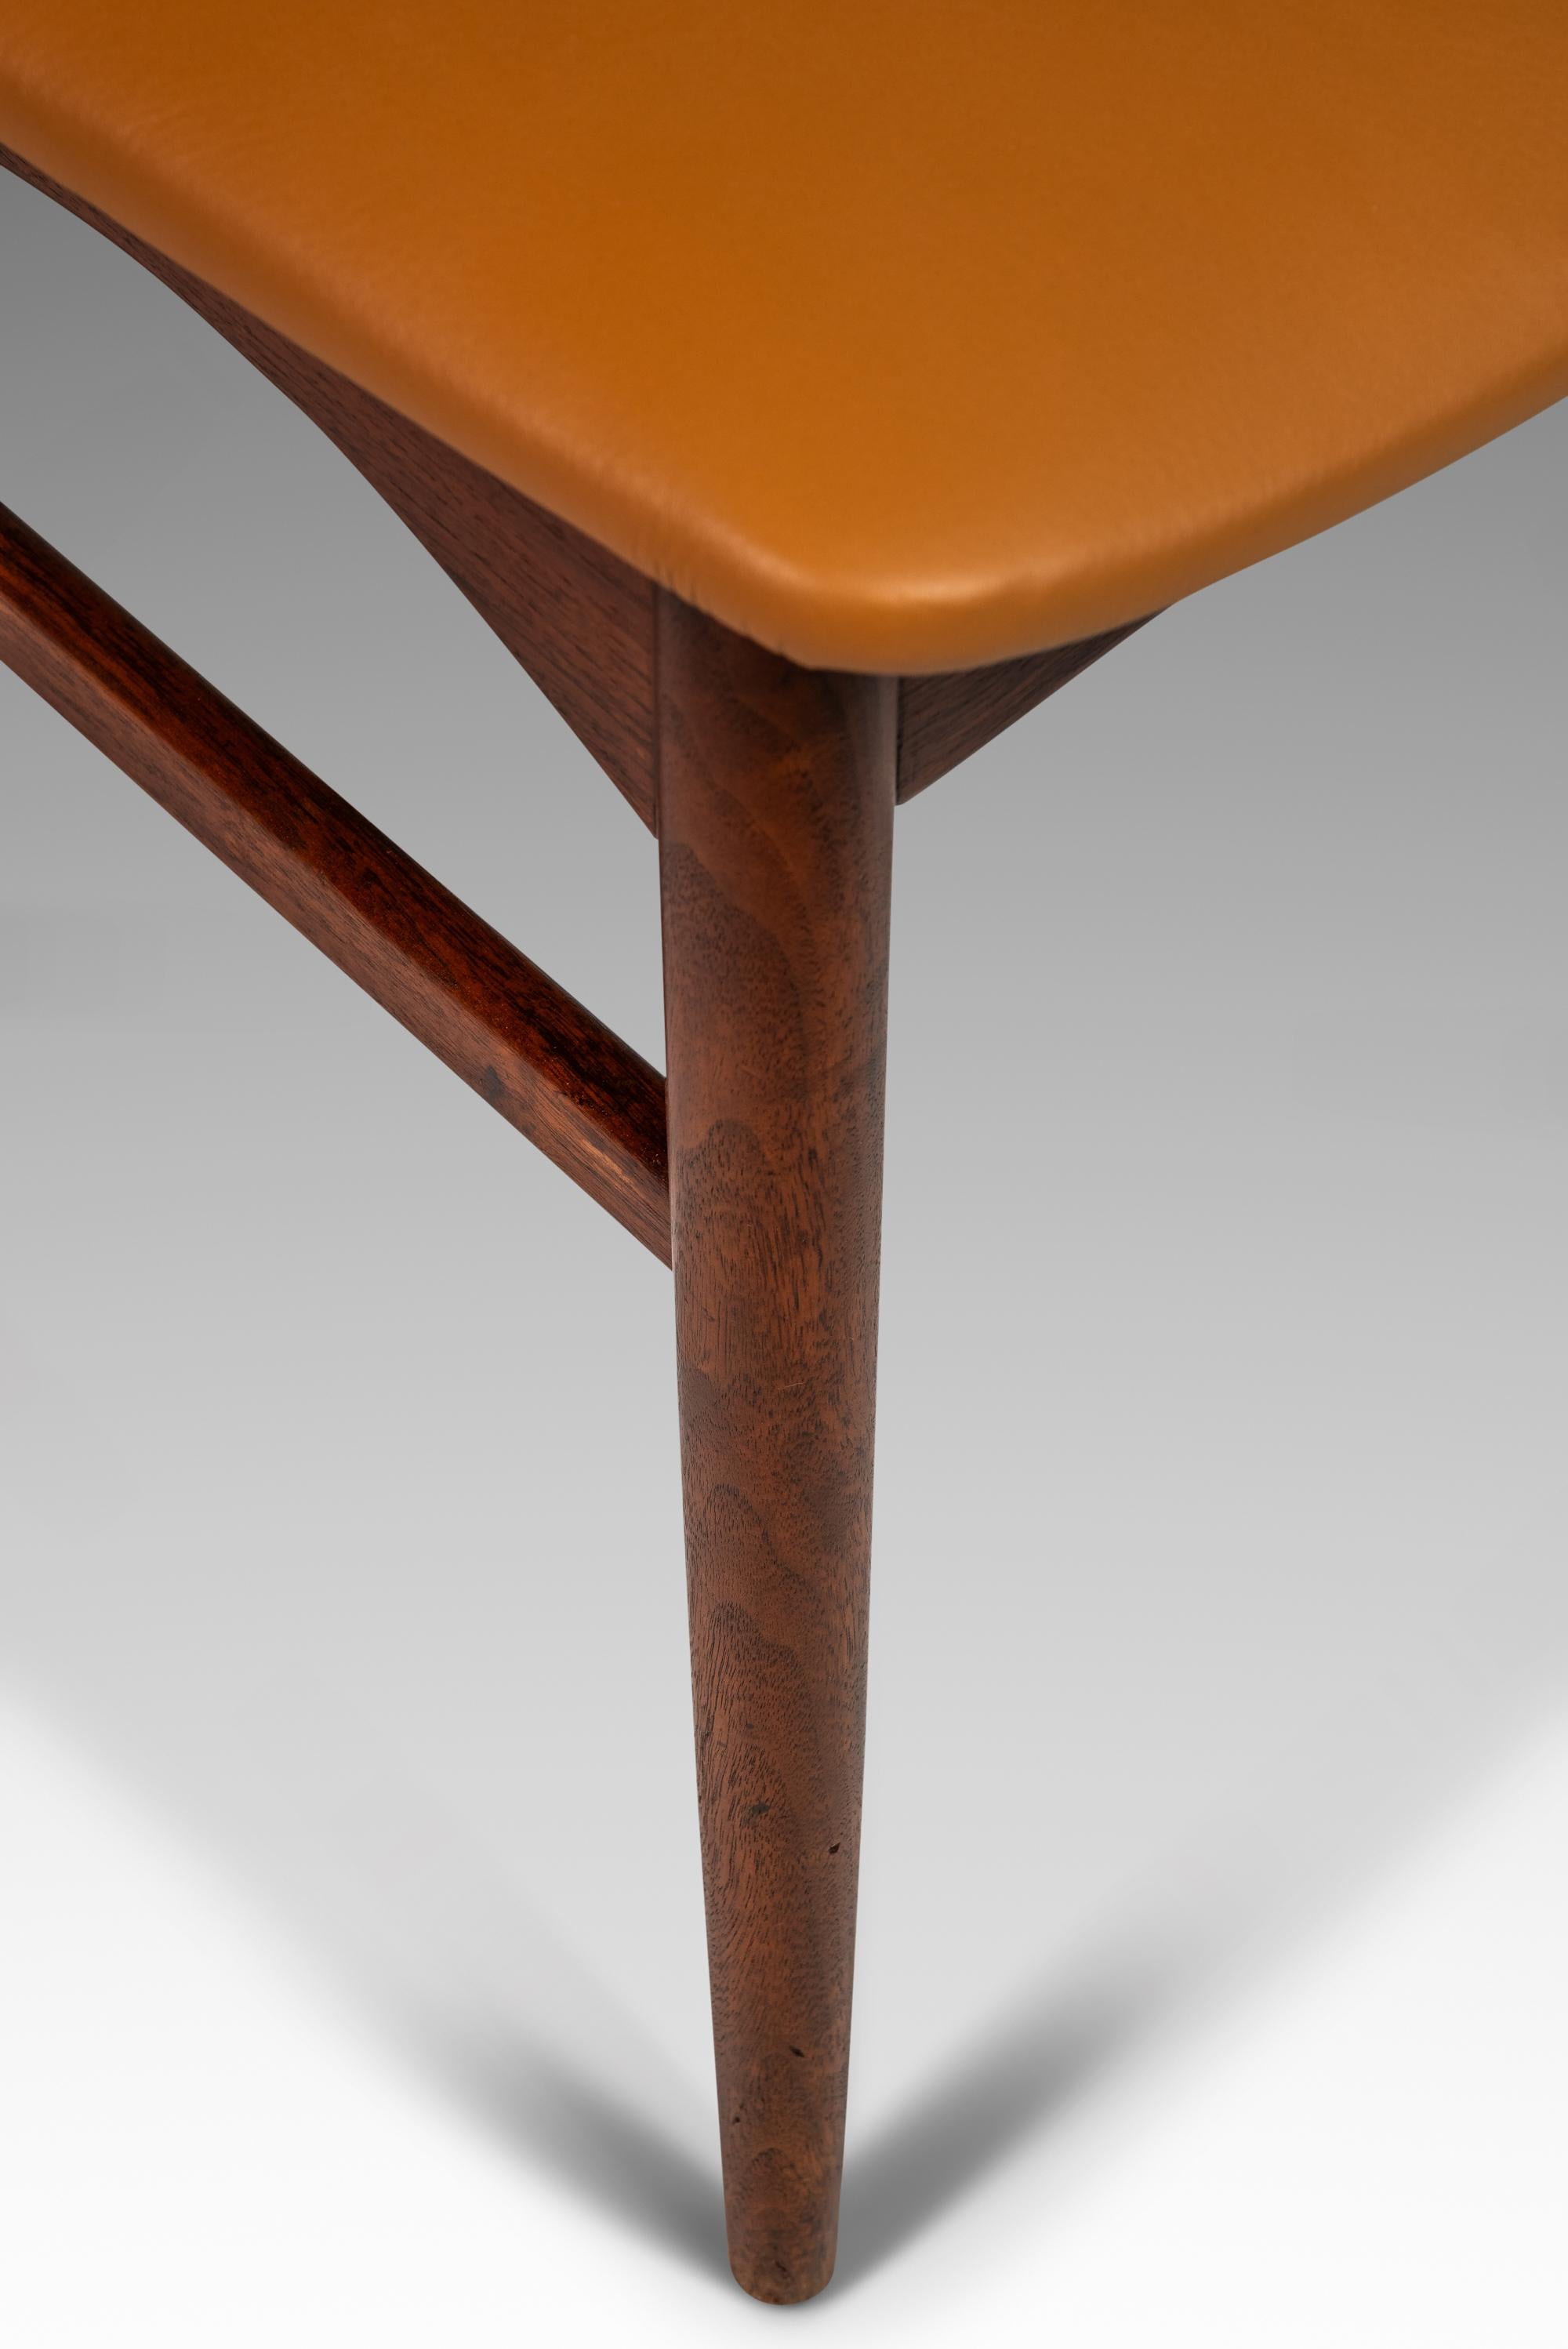 Mid-Century High-Back Walnut & Leather Chair, Niels Koefoed Style, USA, c. 1960 For Sale 3